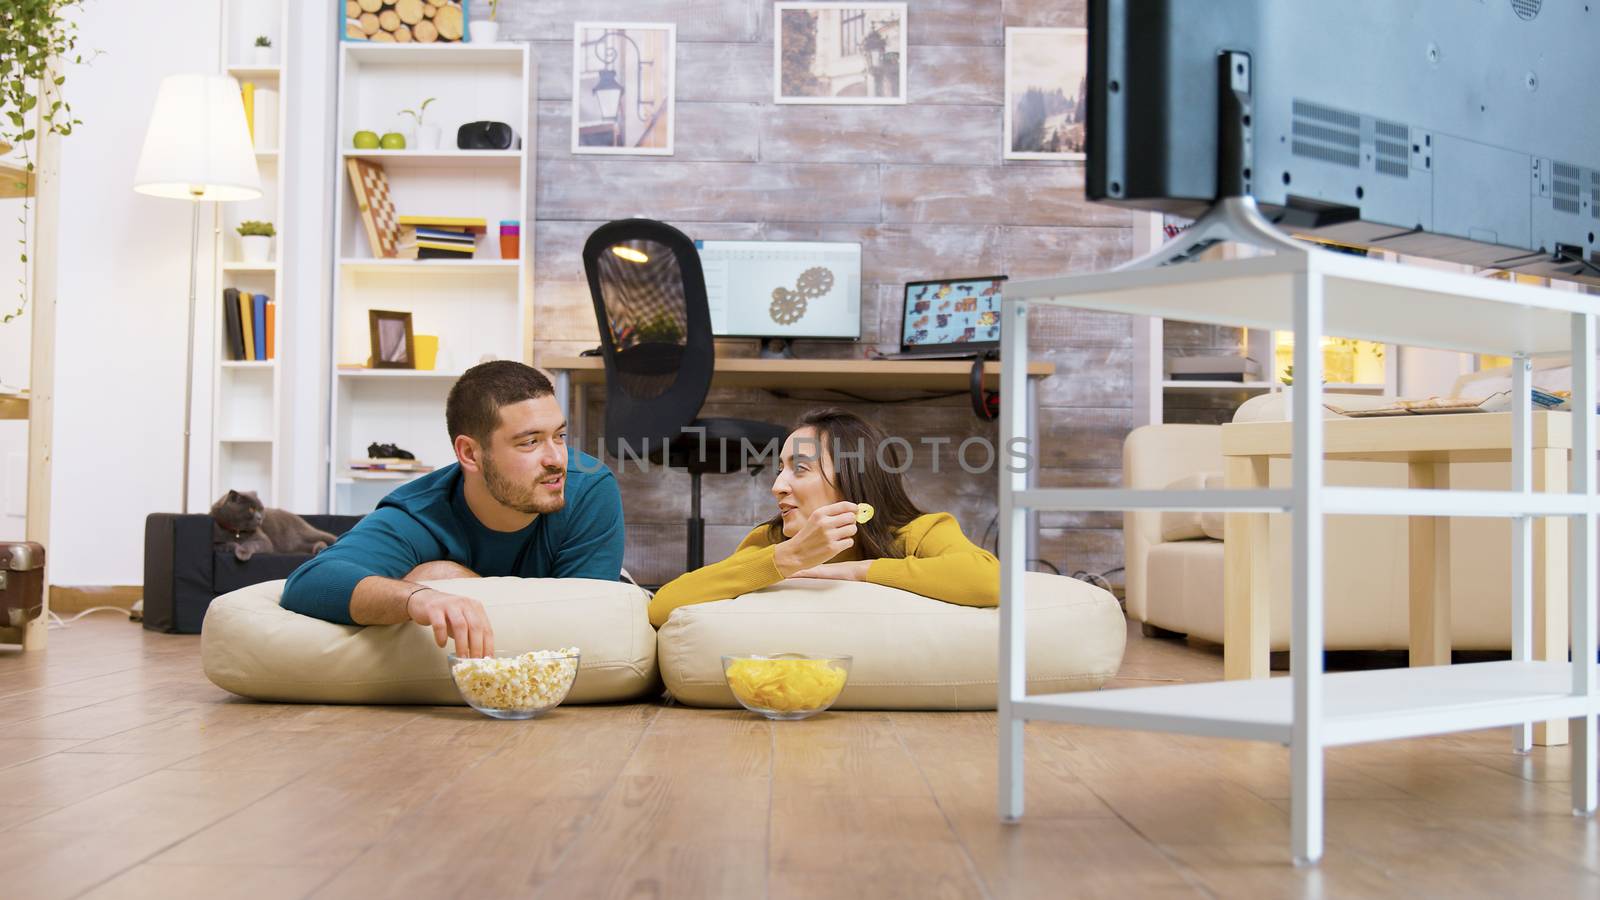 Couple talking with each other watching tv sitting on the pillows for the floor while their cat is relaxing in the background.